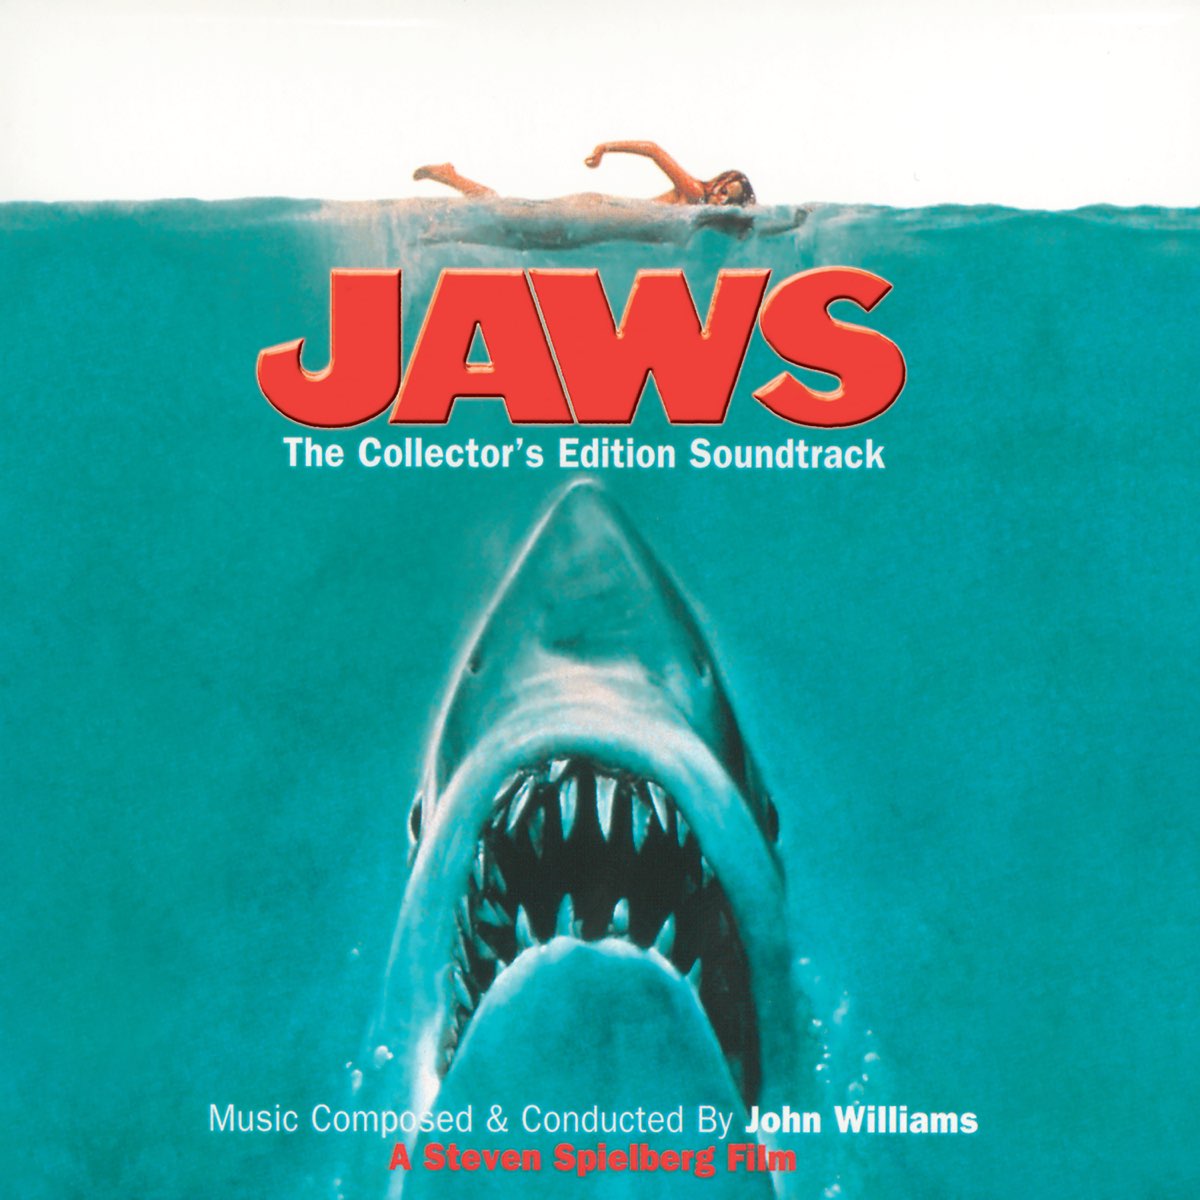 ‎Jaws (The Collector's Edition Soundtrack) - Album by John Williams 